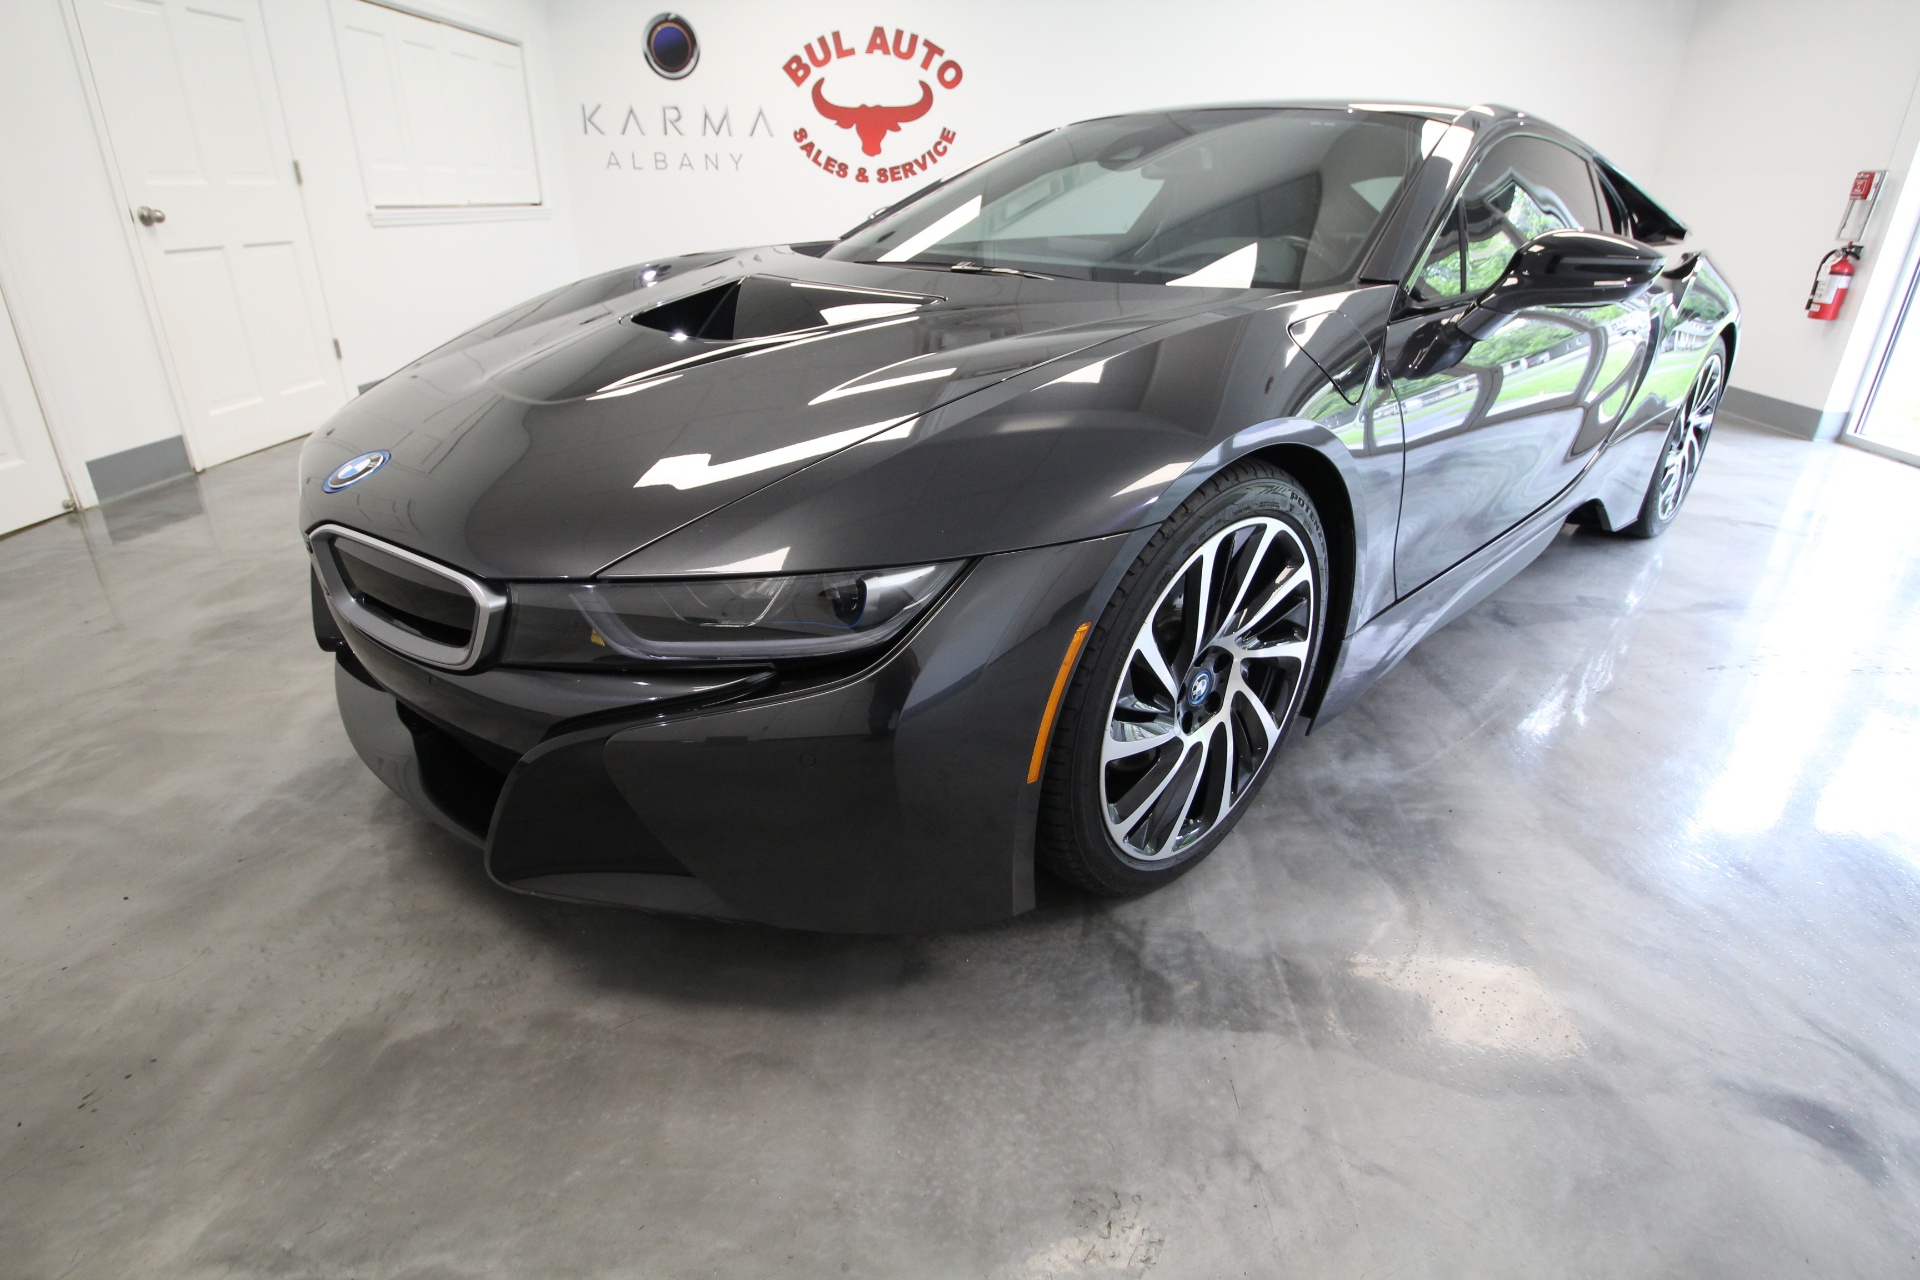 Used 2017 GREY BMW i8 LOW MILES SUPERB INSIDE AND OUT | Albany, NY